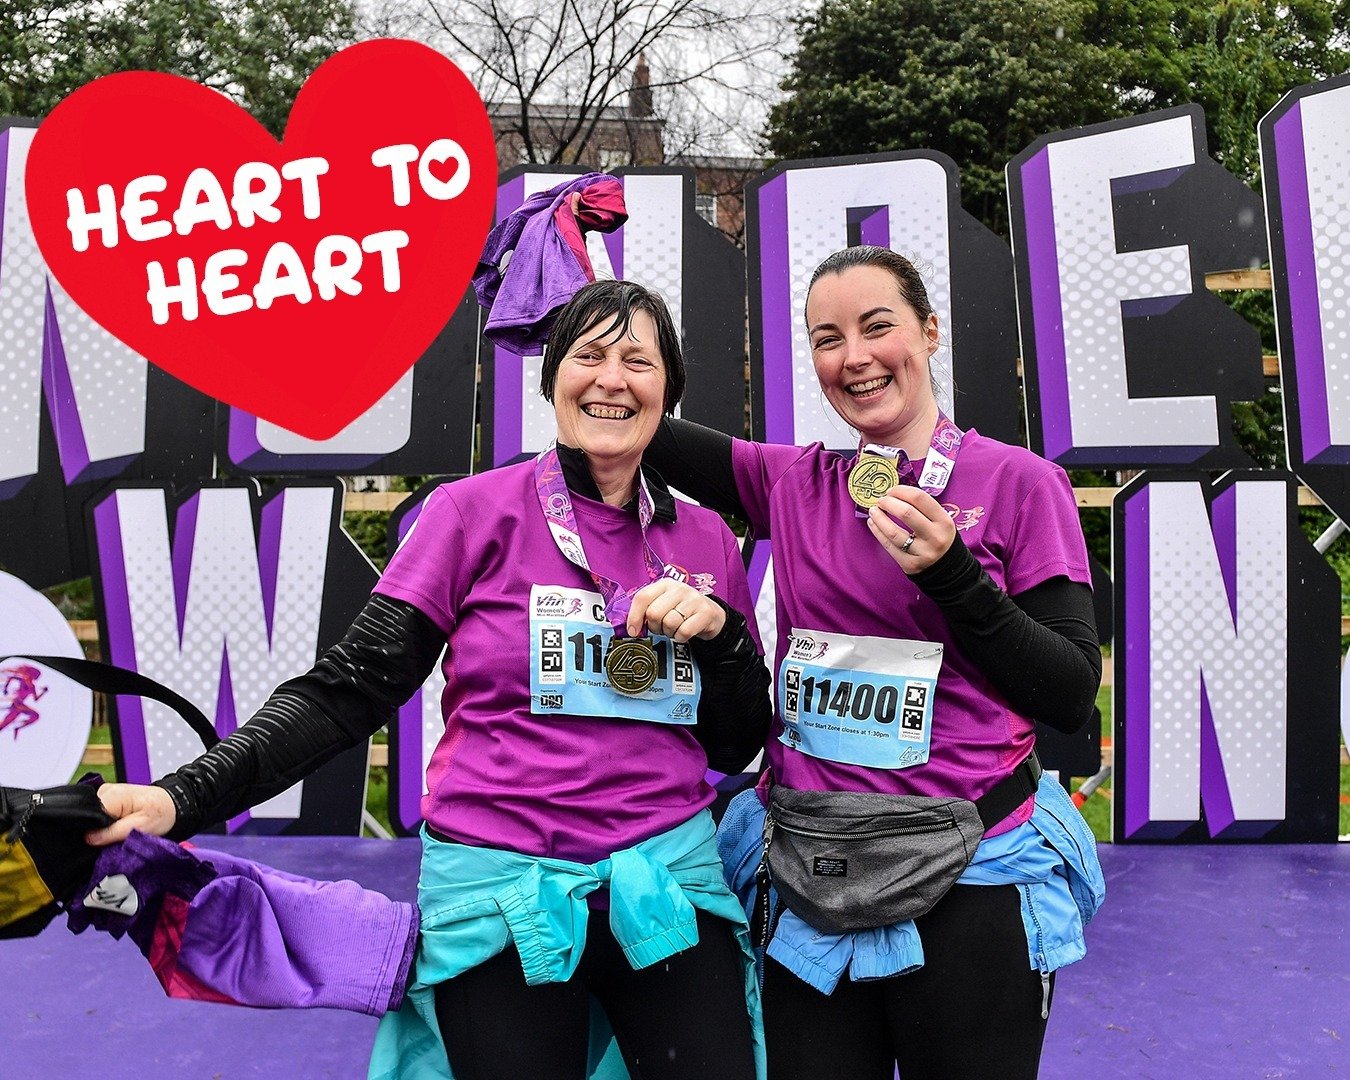 We're proud to be an event that has had many generations of women take part over the years! Seeing all the Mum's and Daughters, Aunties and Nieces, Grannys and Granddaughters together always brings us so much joy ❤️👩&zwj;👧

#hearttoheart #VhiWMM #D